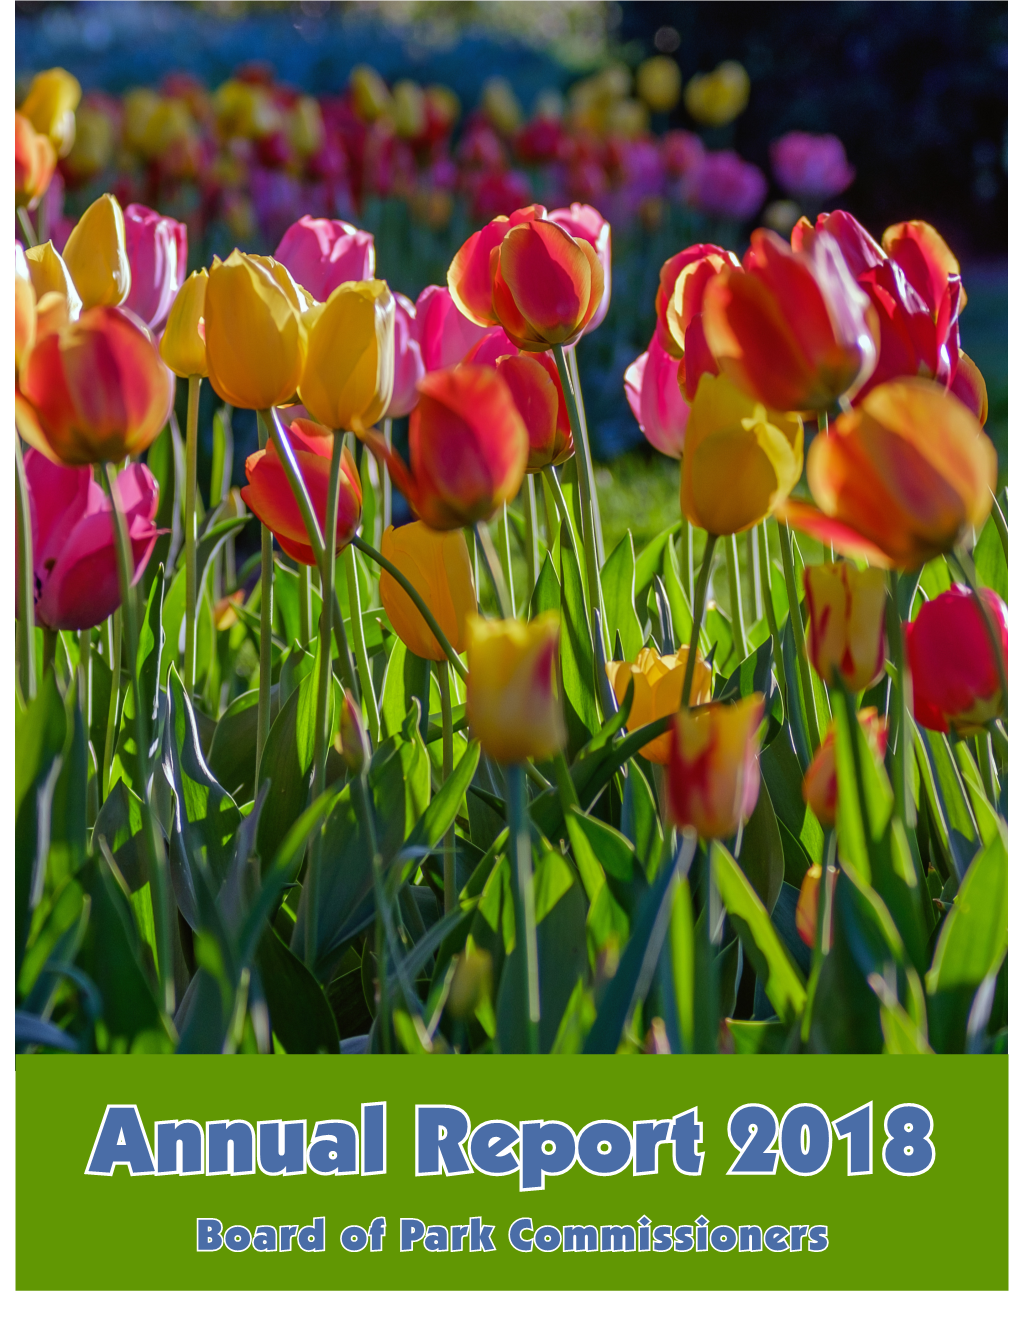 Annual Report 2018 Board of Park Commissioners